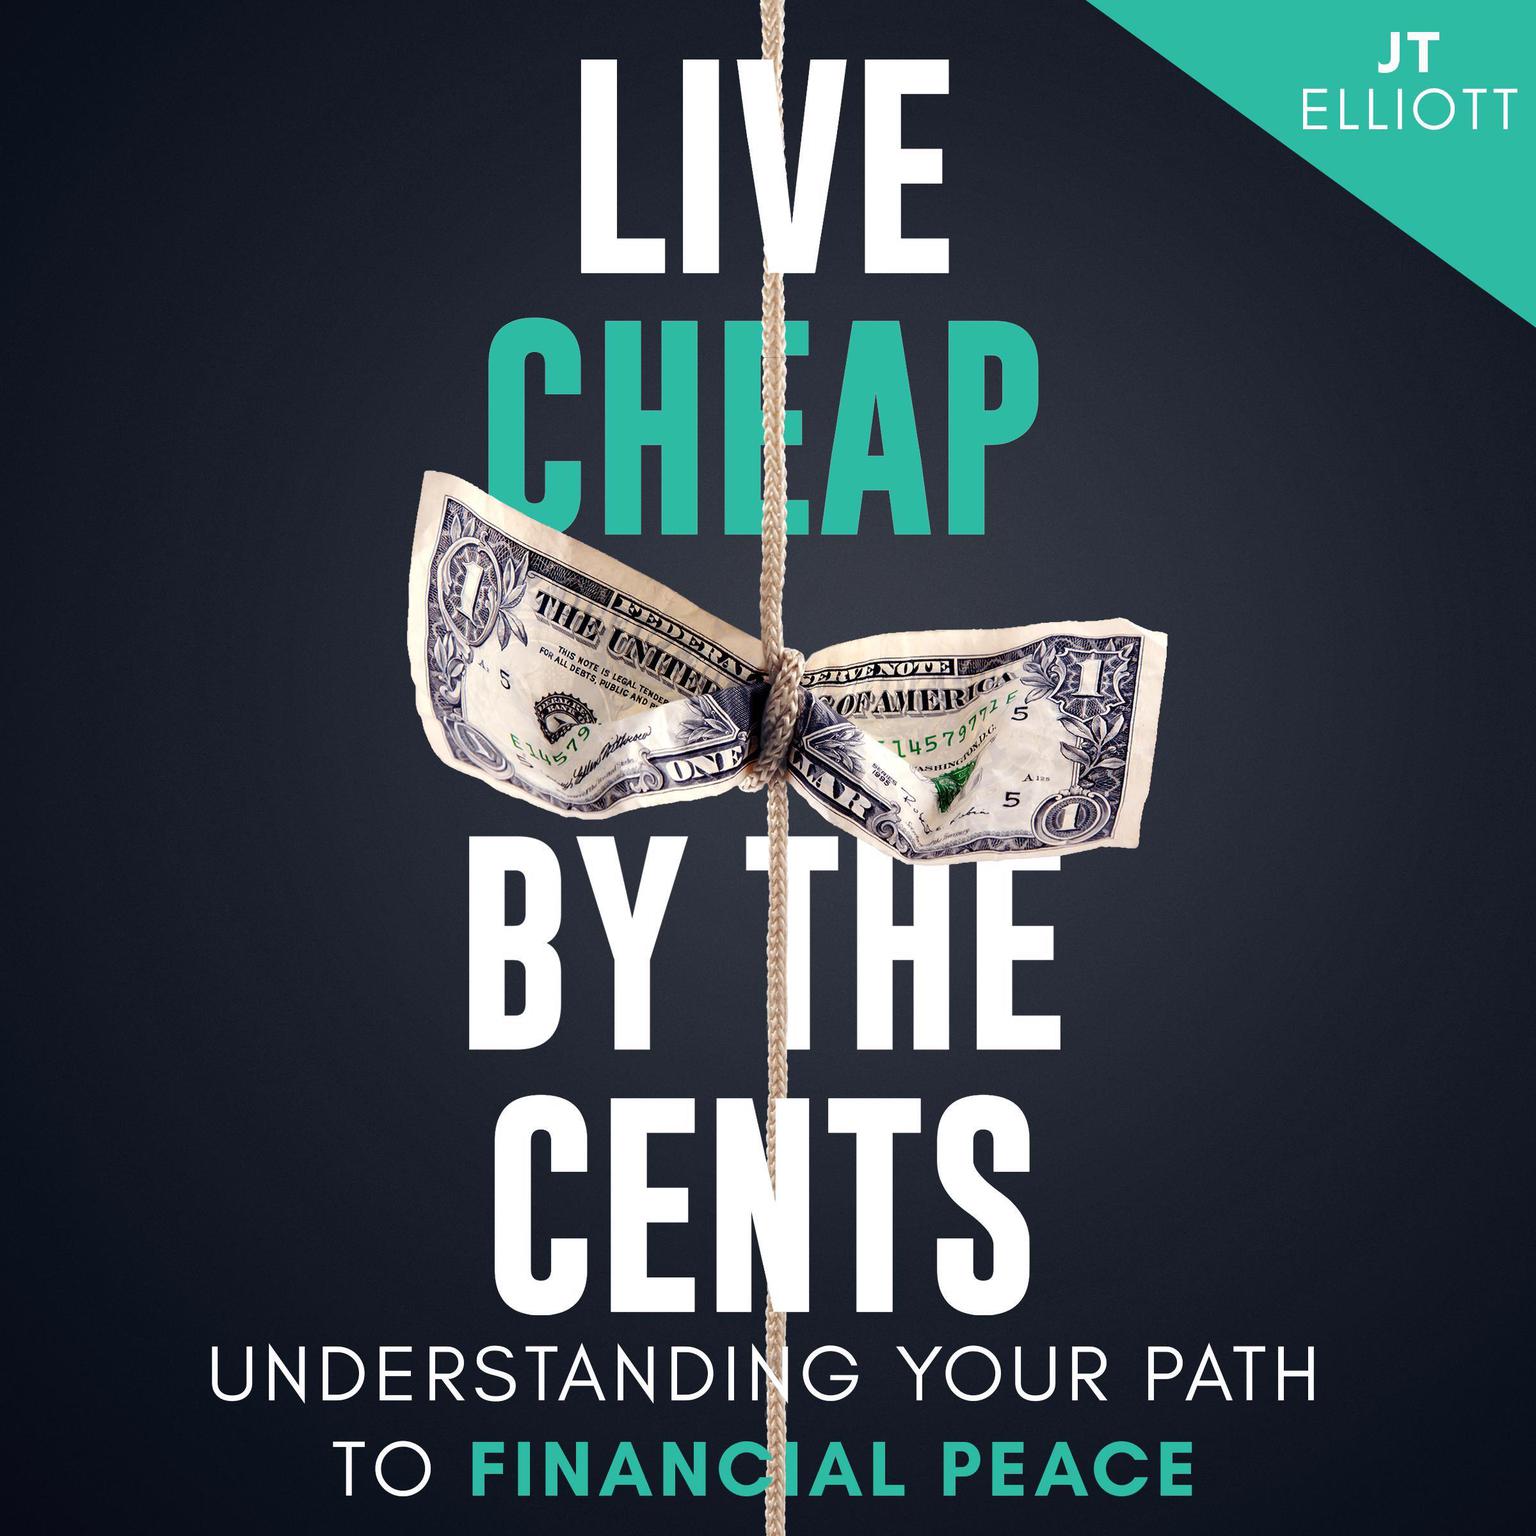 Live Cheap by the Cents: Understanding Your Path to Financial Peace Audiobook, by JT Elliott